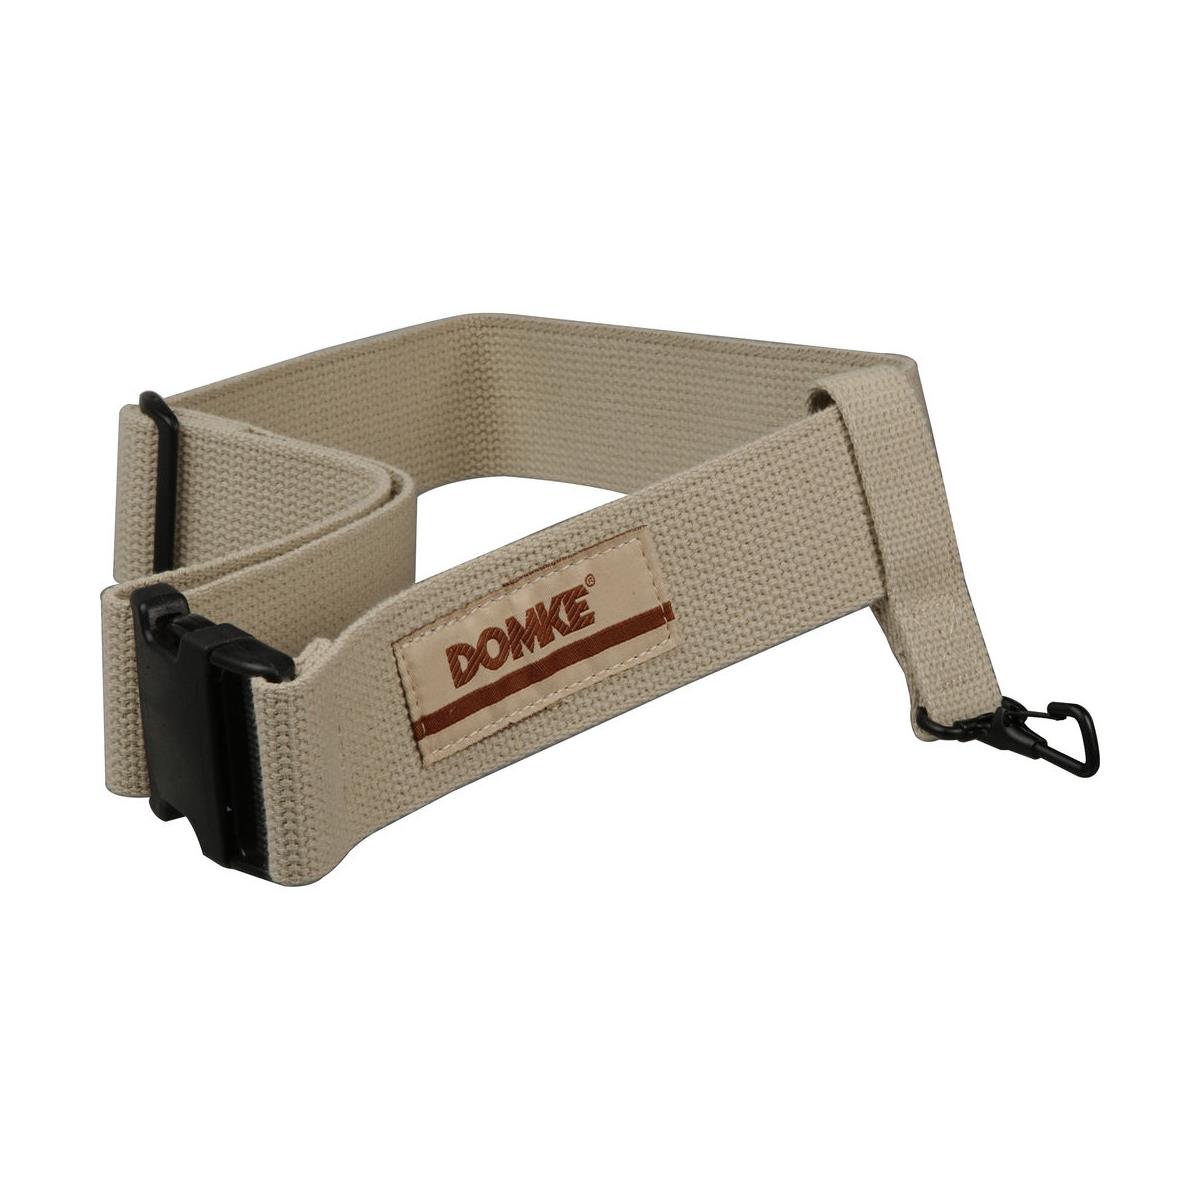 Domke Large Waist Belt for F-5XB and Accessory Pouches, Tan -  7453TN